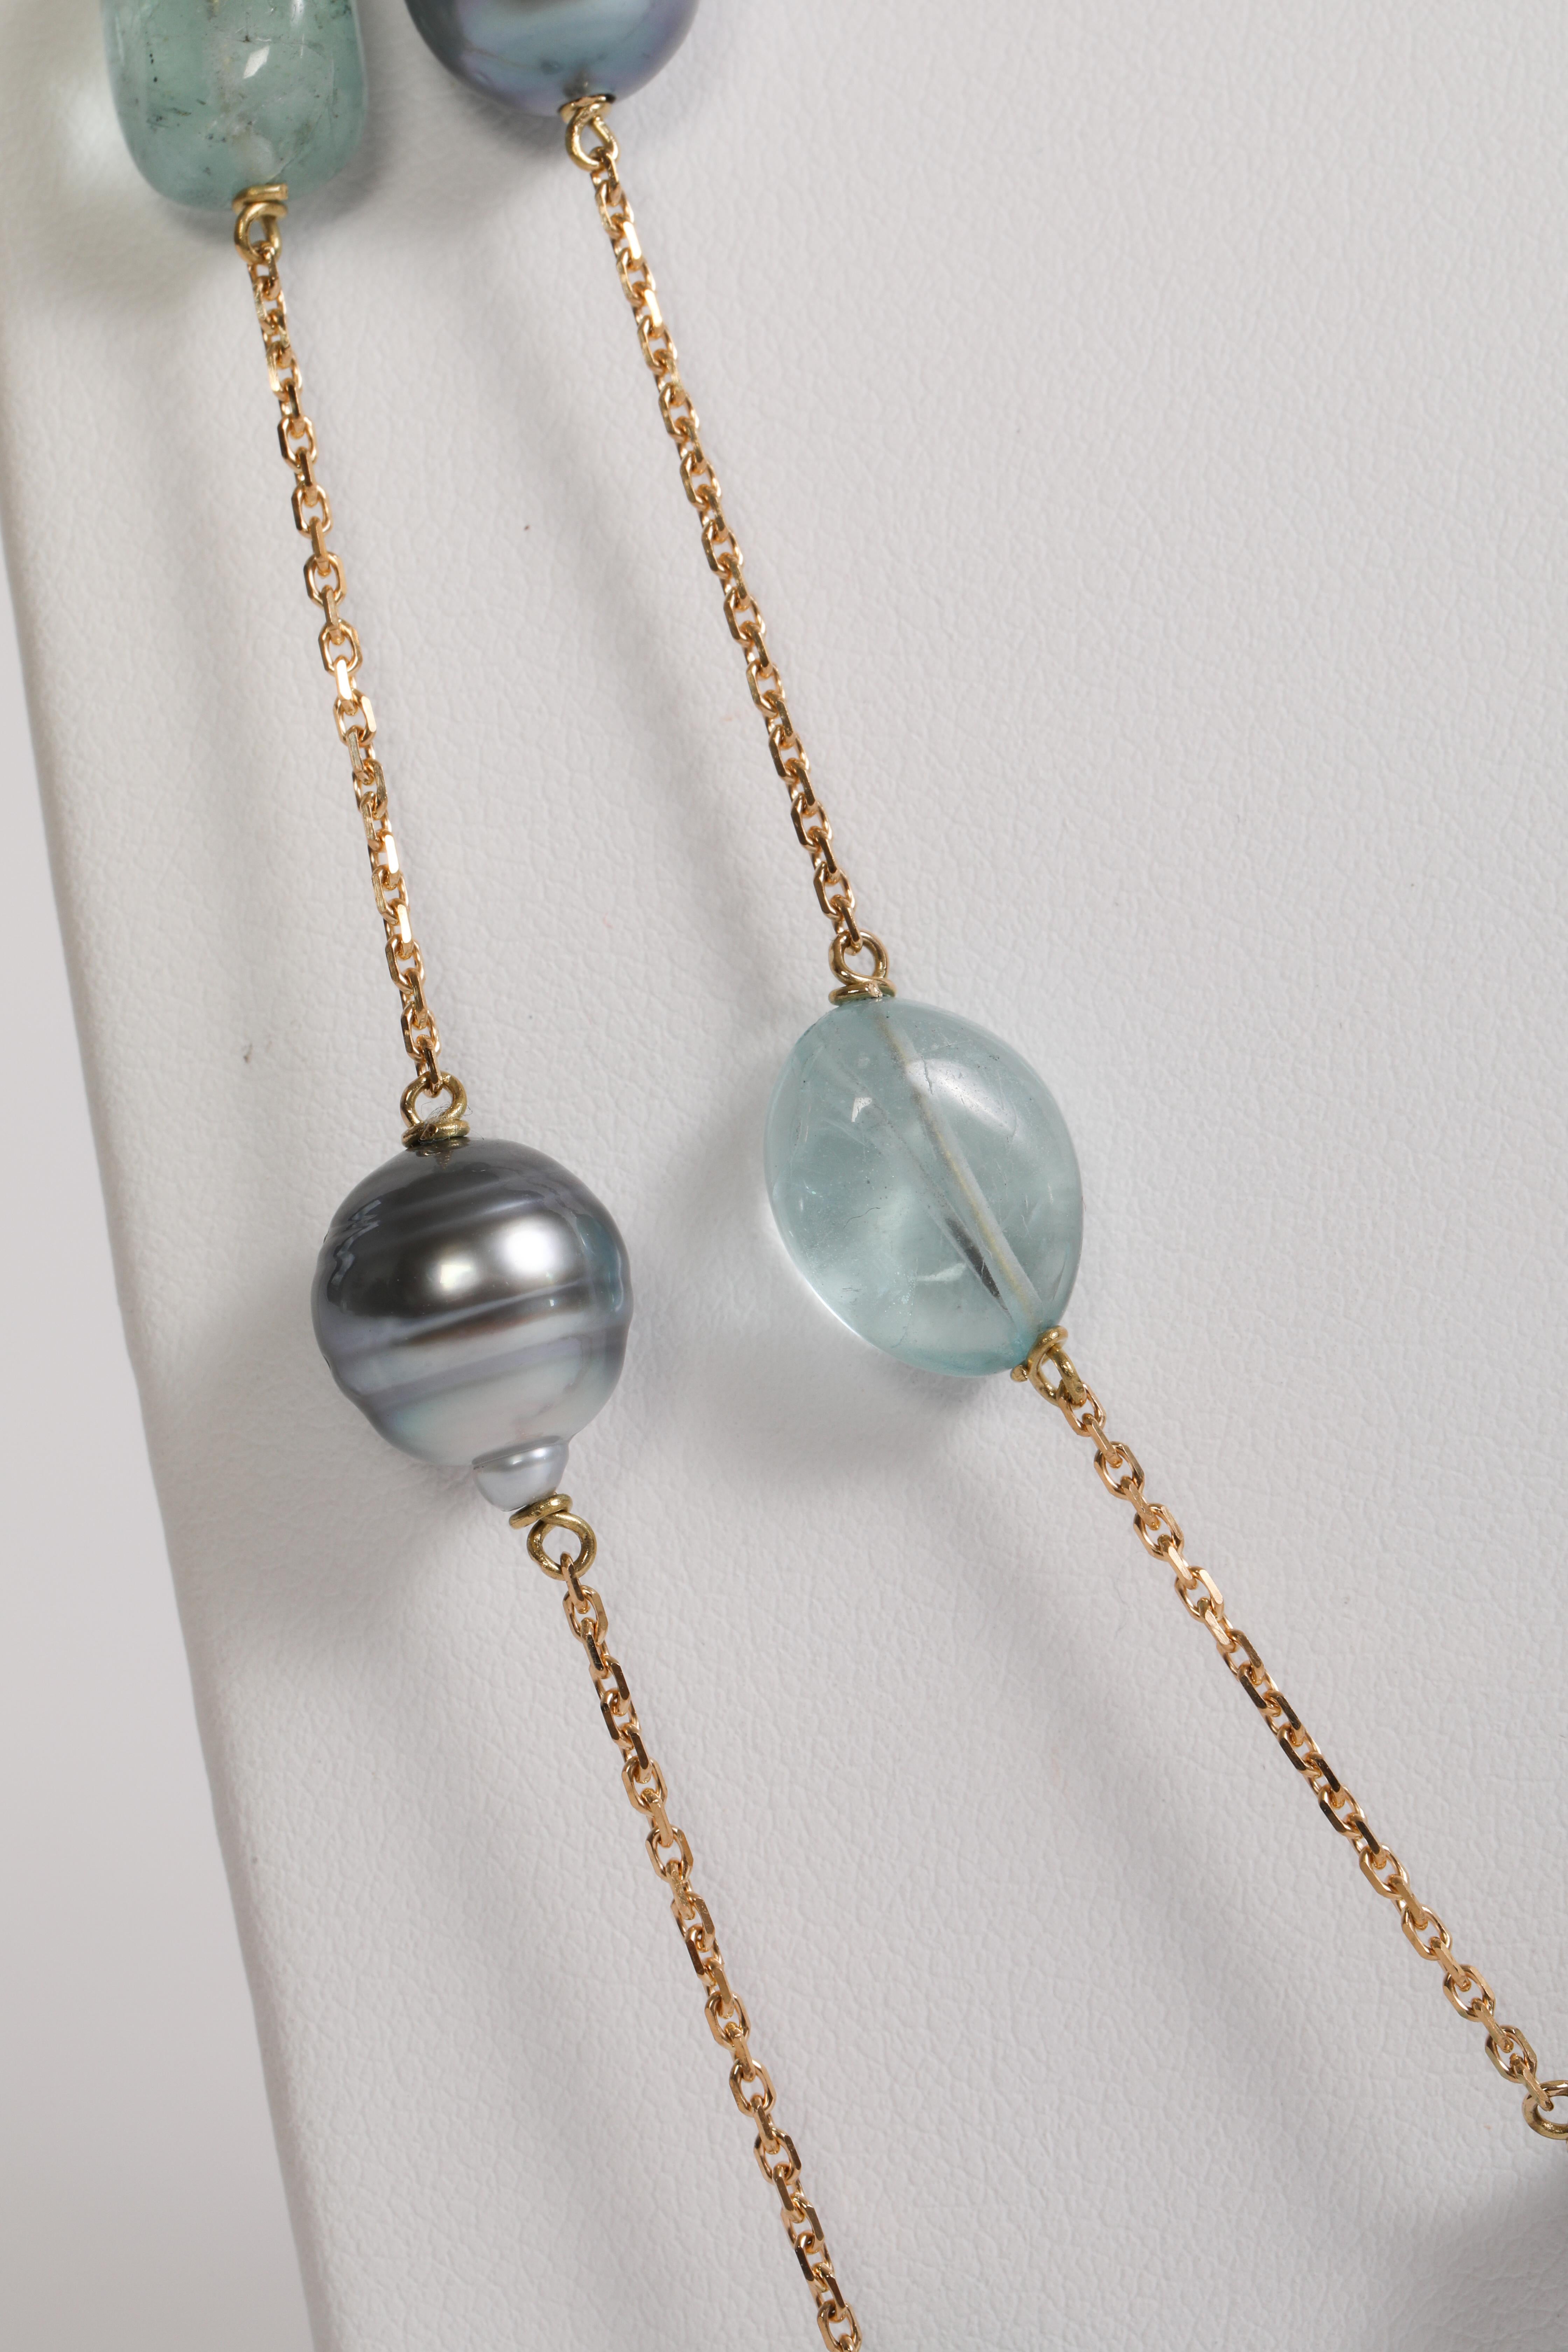 Contemporary Baroque Tahiti Pearls and Aquamarine Long Necklace Created by Marion Jeantet For Sale